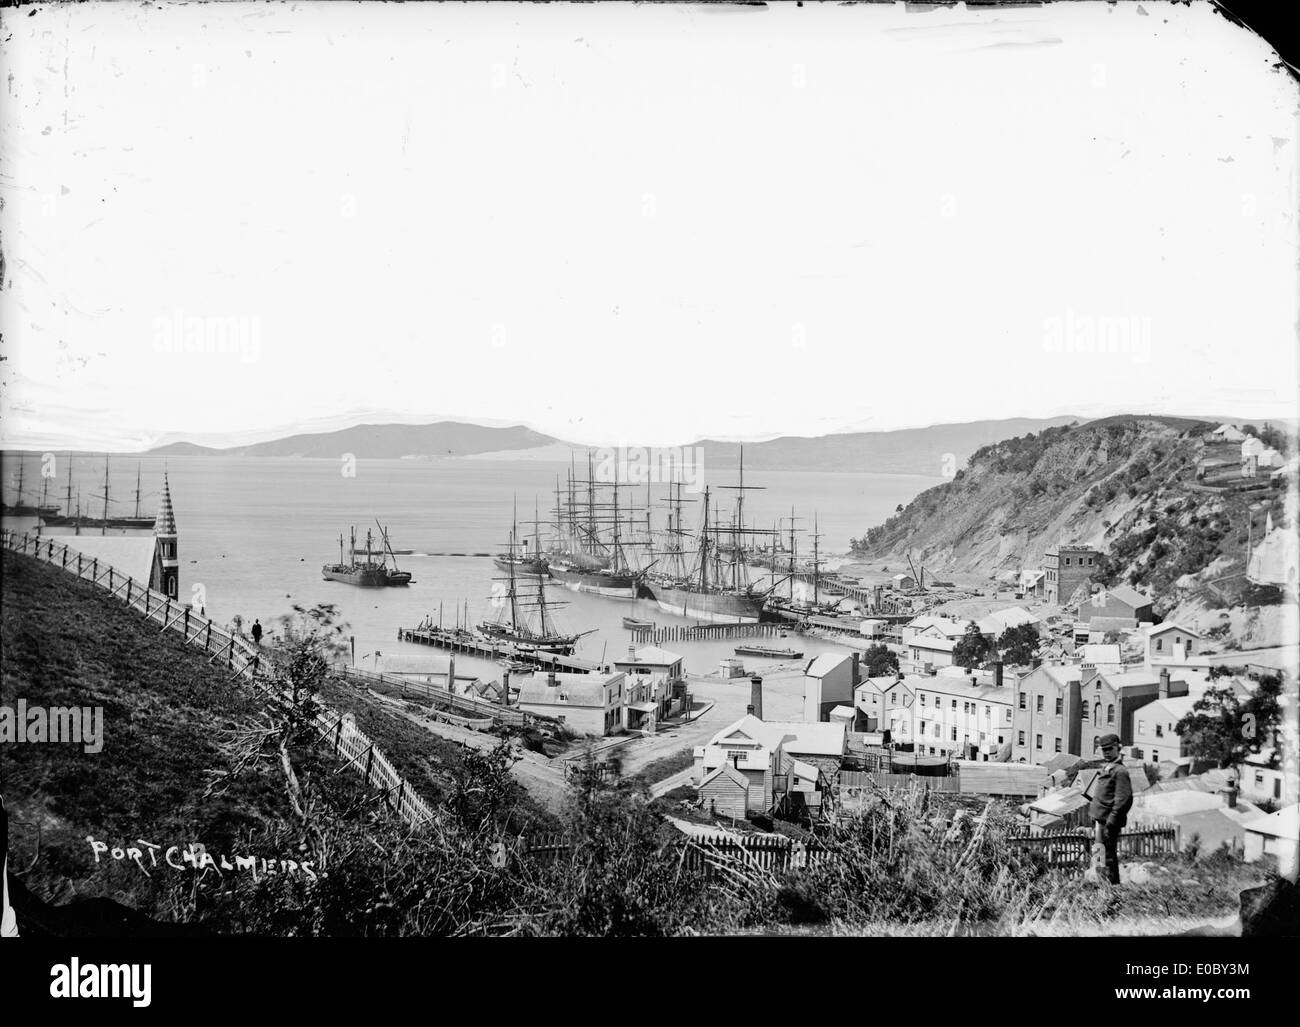 View of old Port Chalmers looking from the hill above the harbour, looking down towards the wharves, 1870s Stock Photo